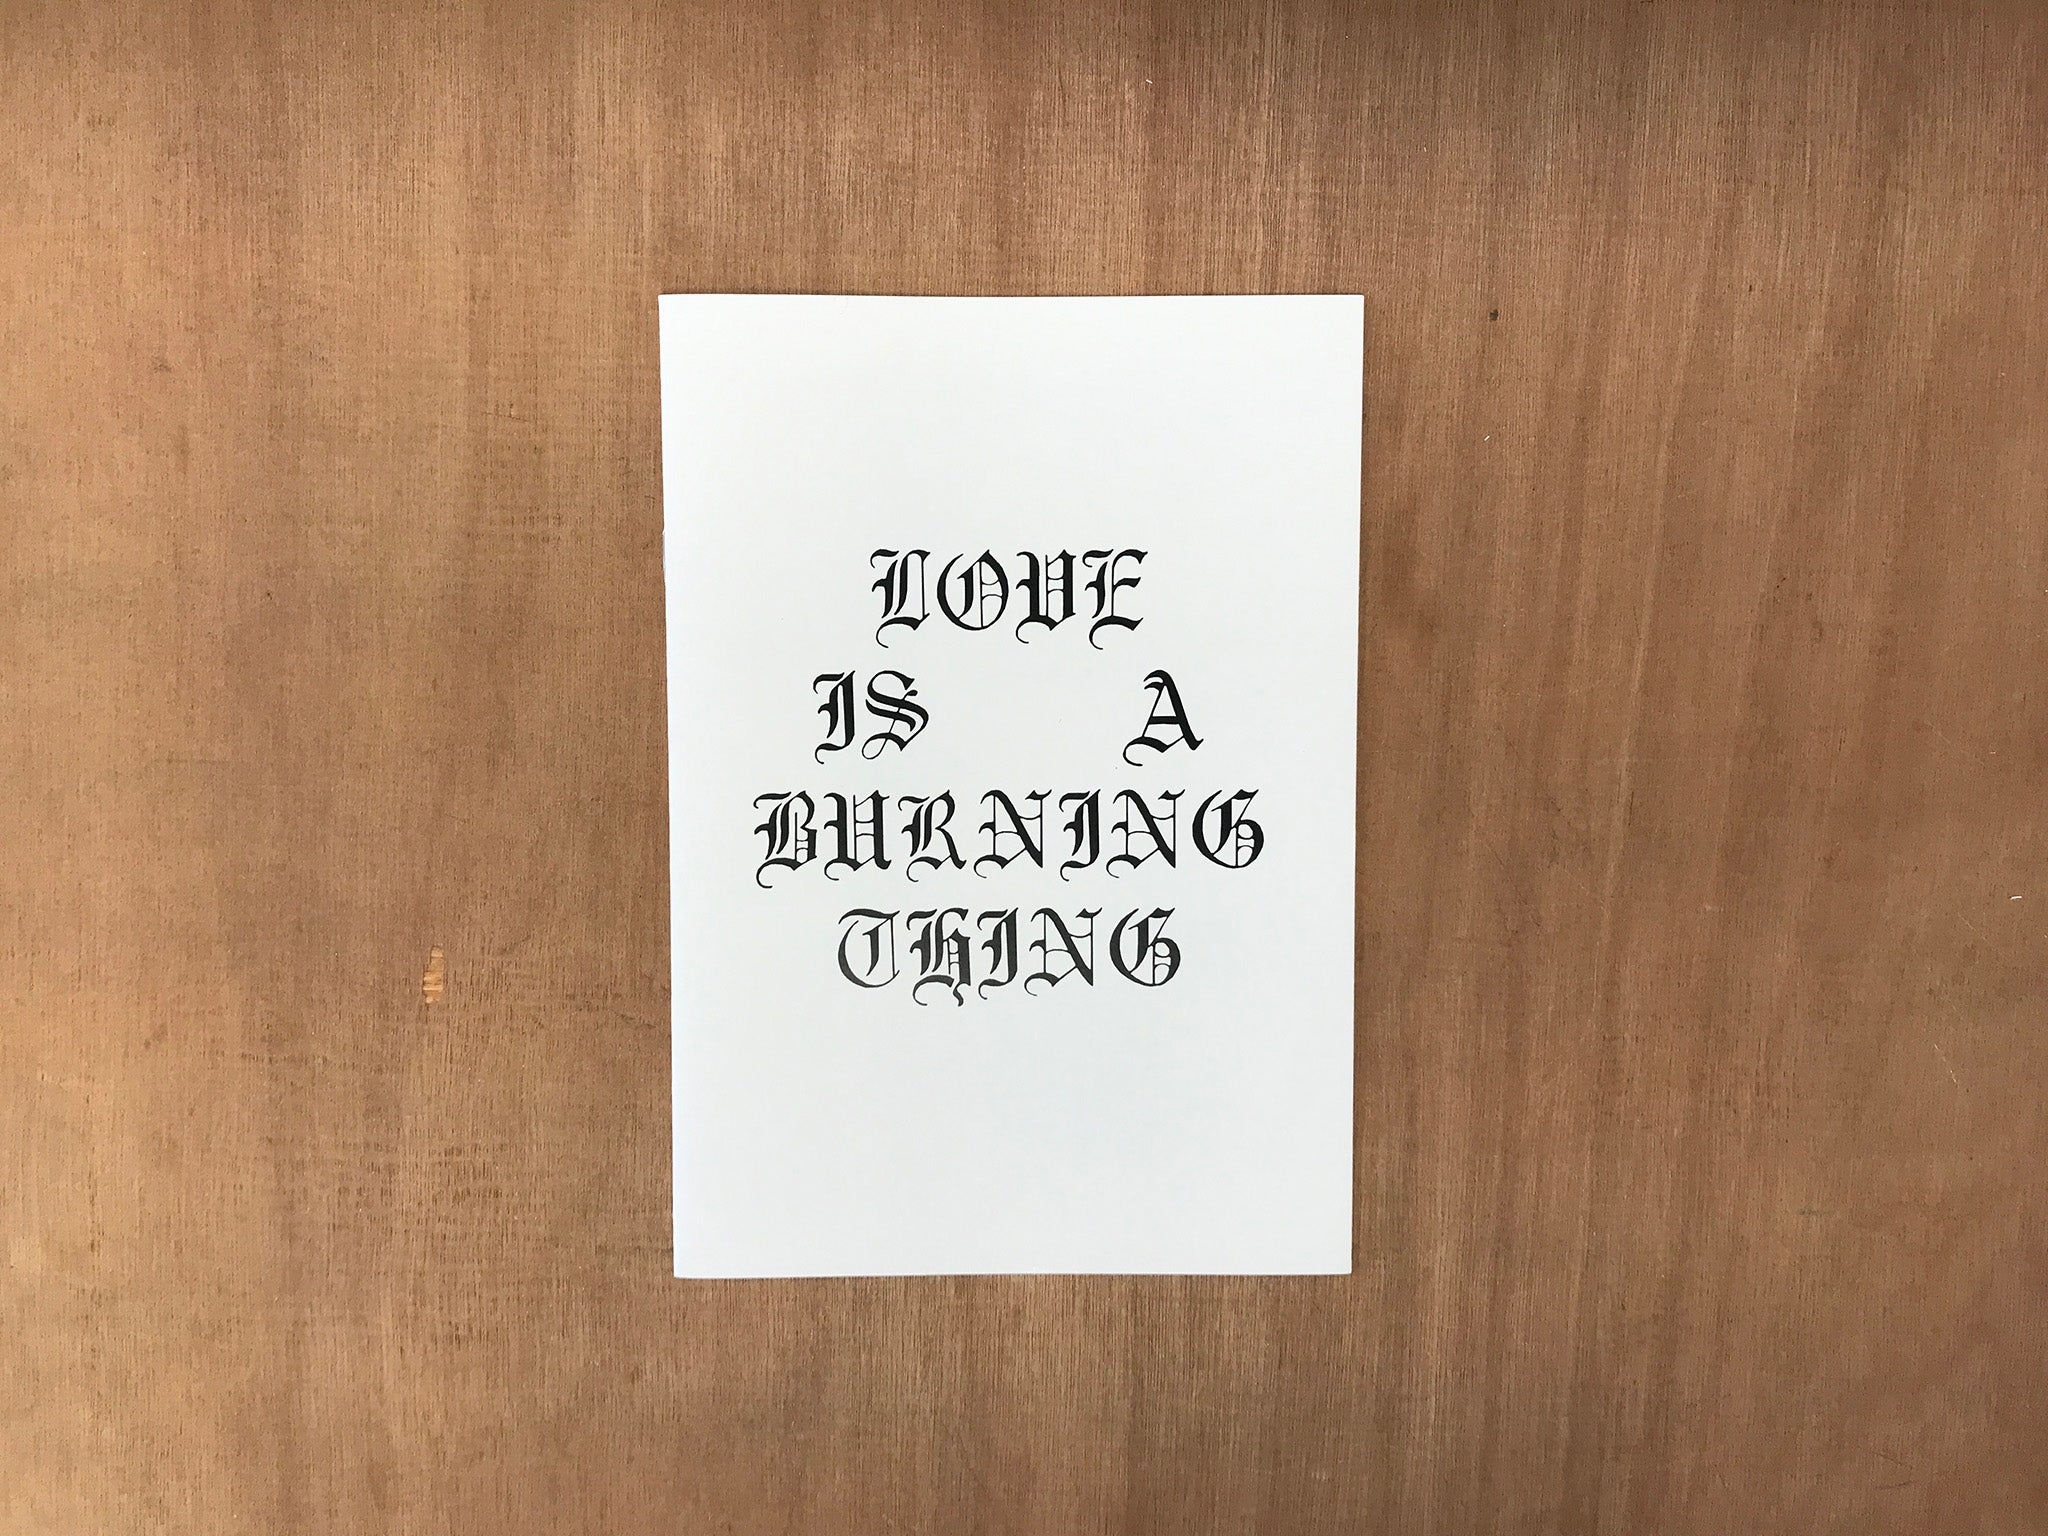 LOVE IS A BURNING THING by Ali Lotz